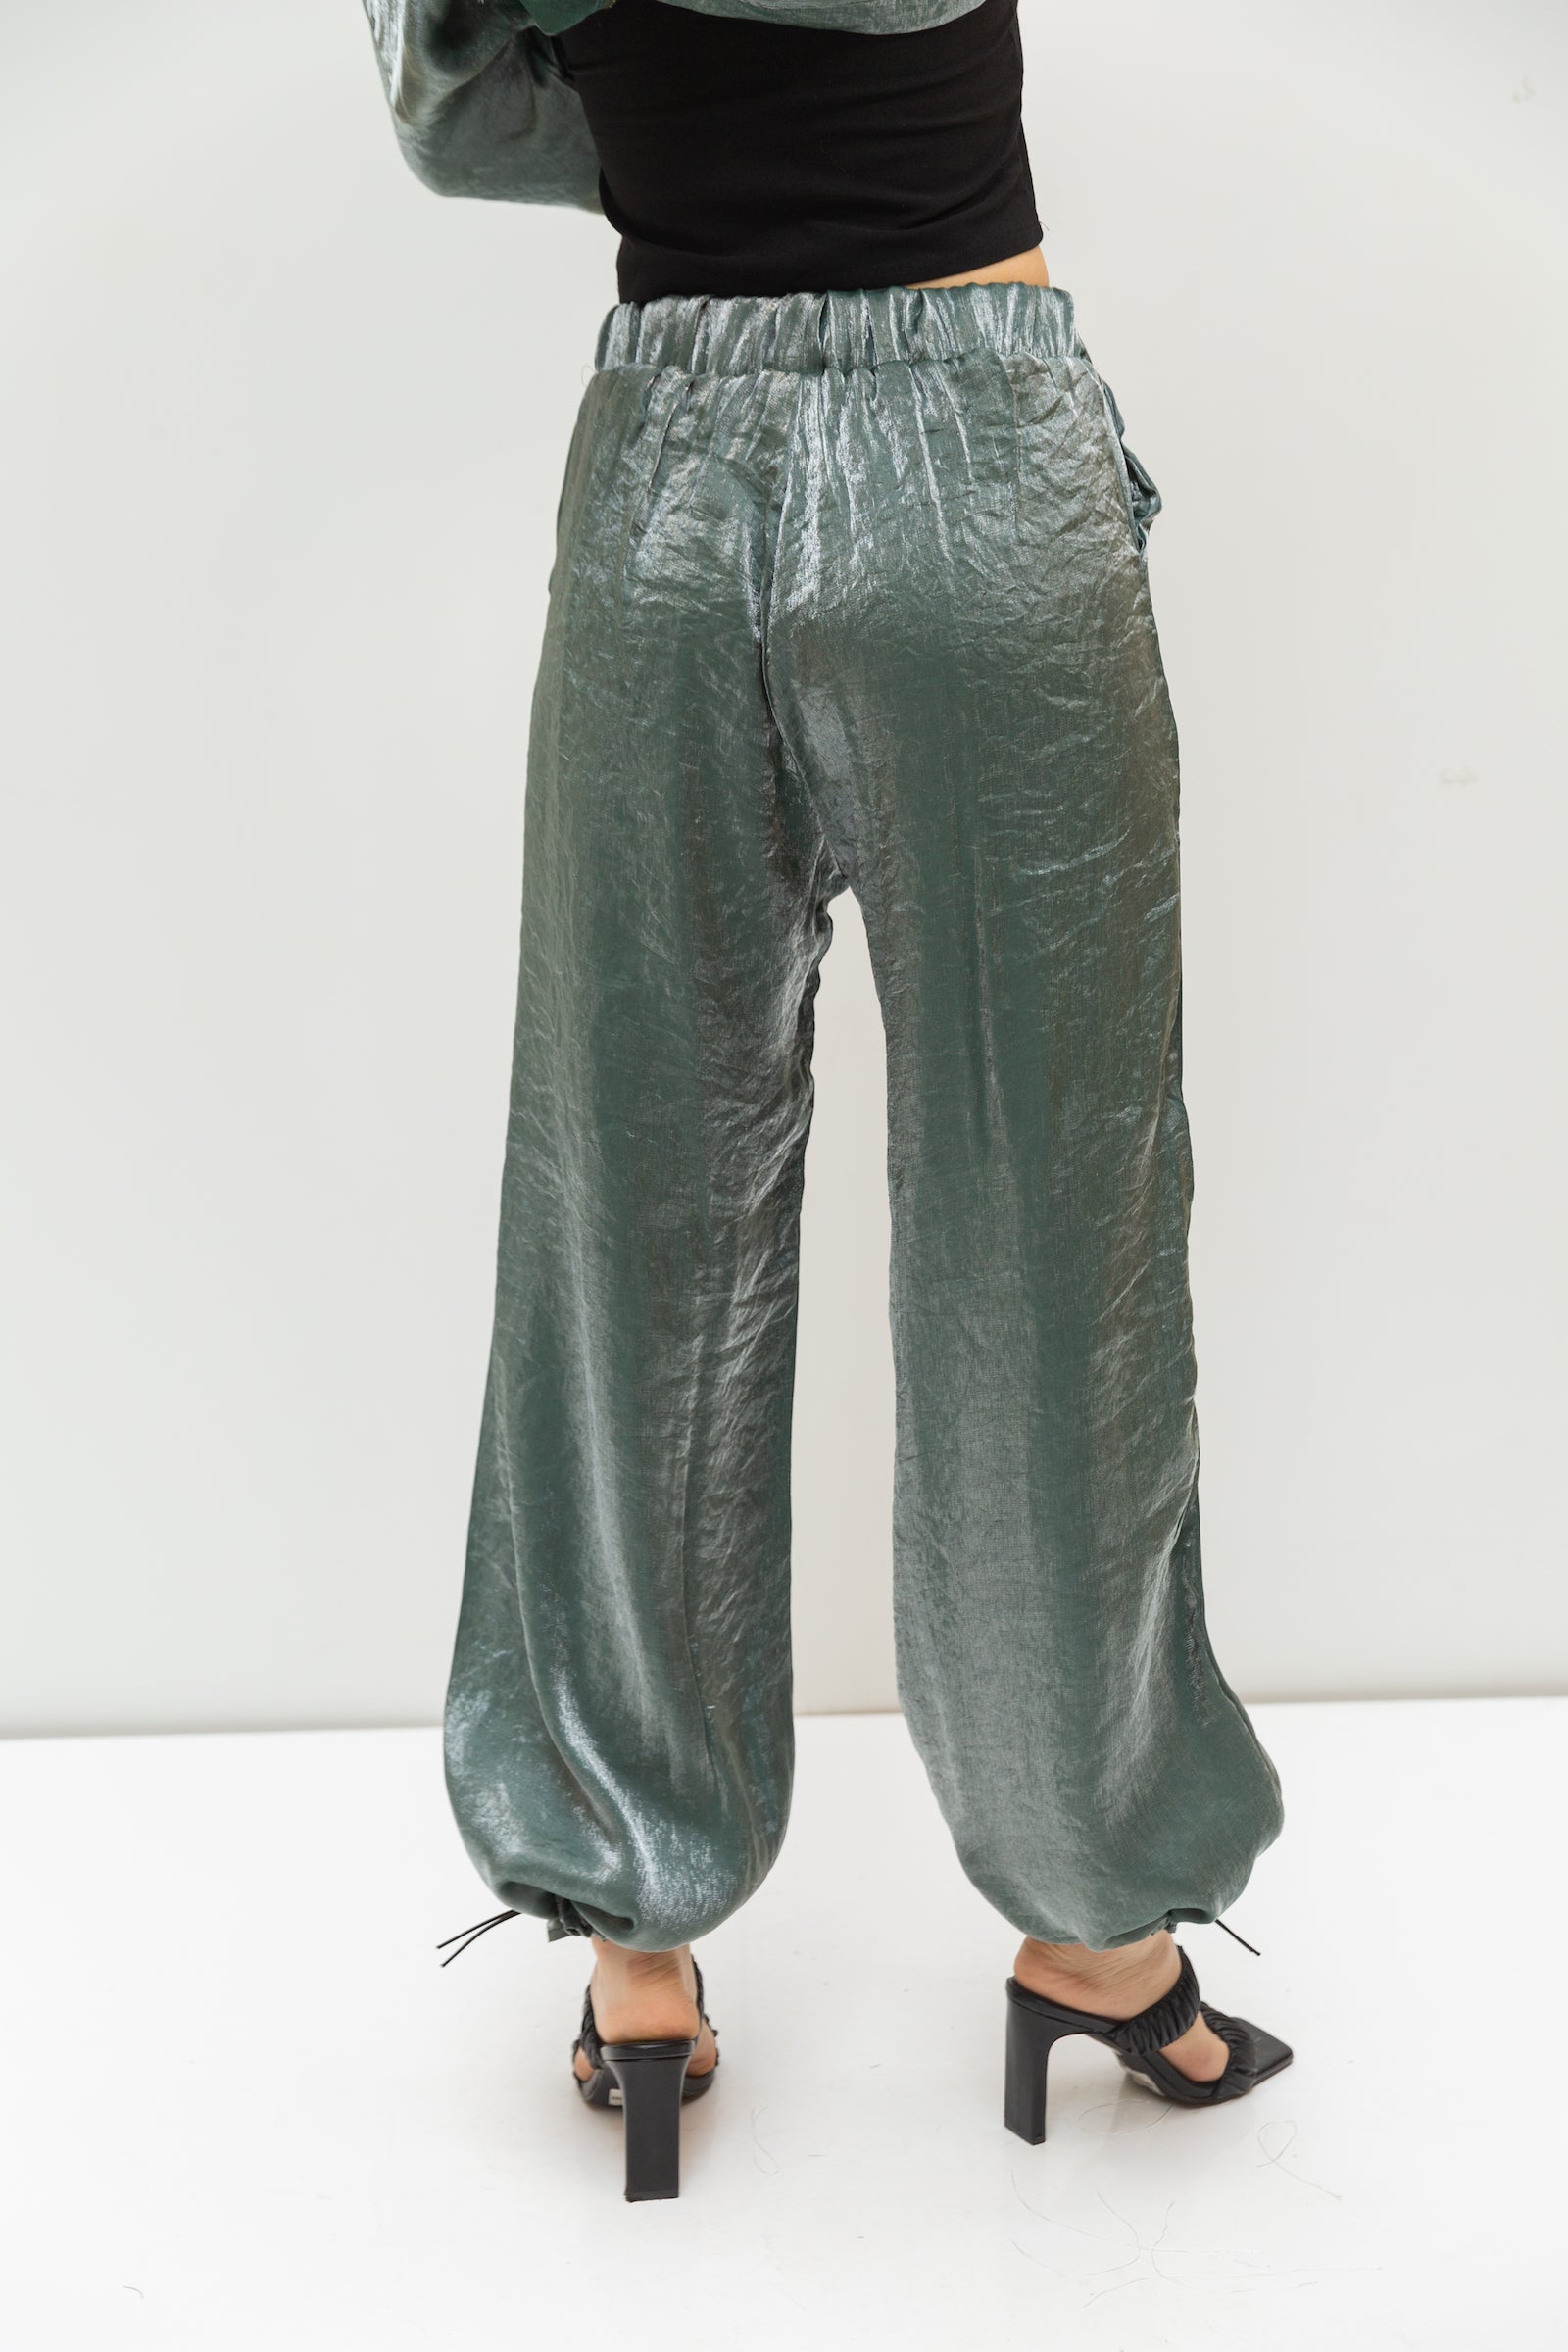 Shimmery pants in olive